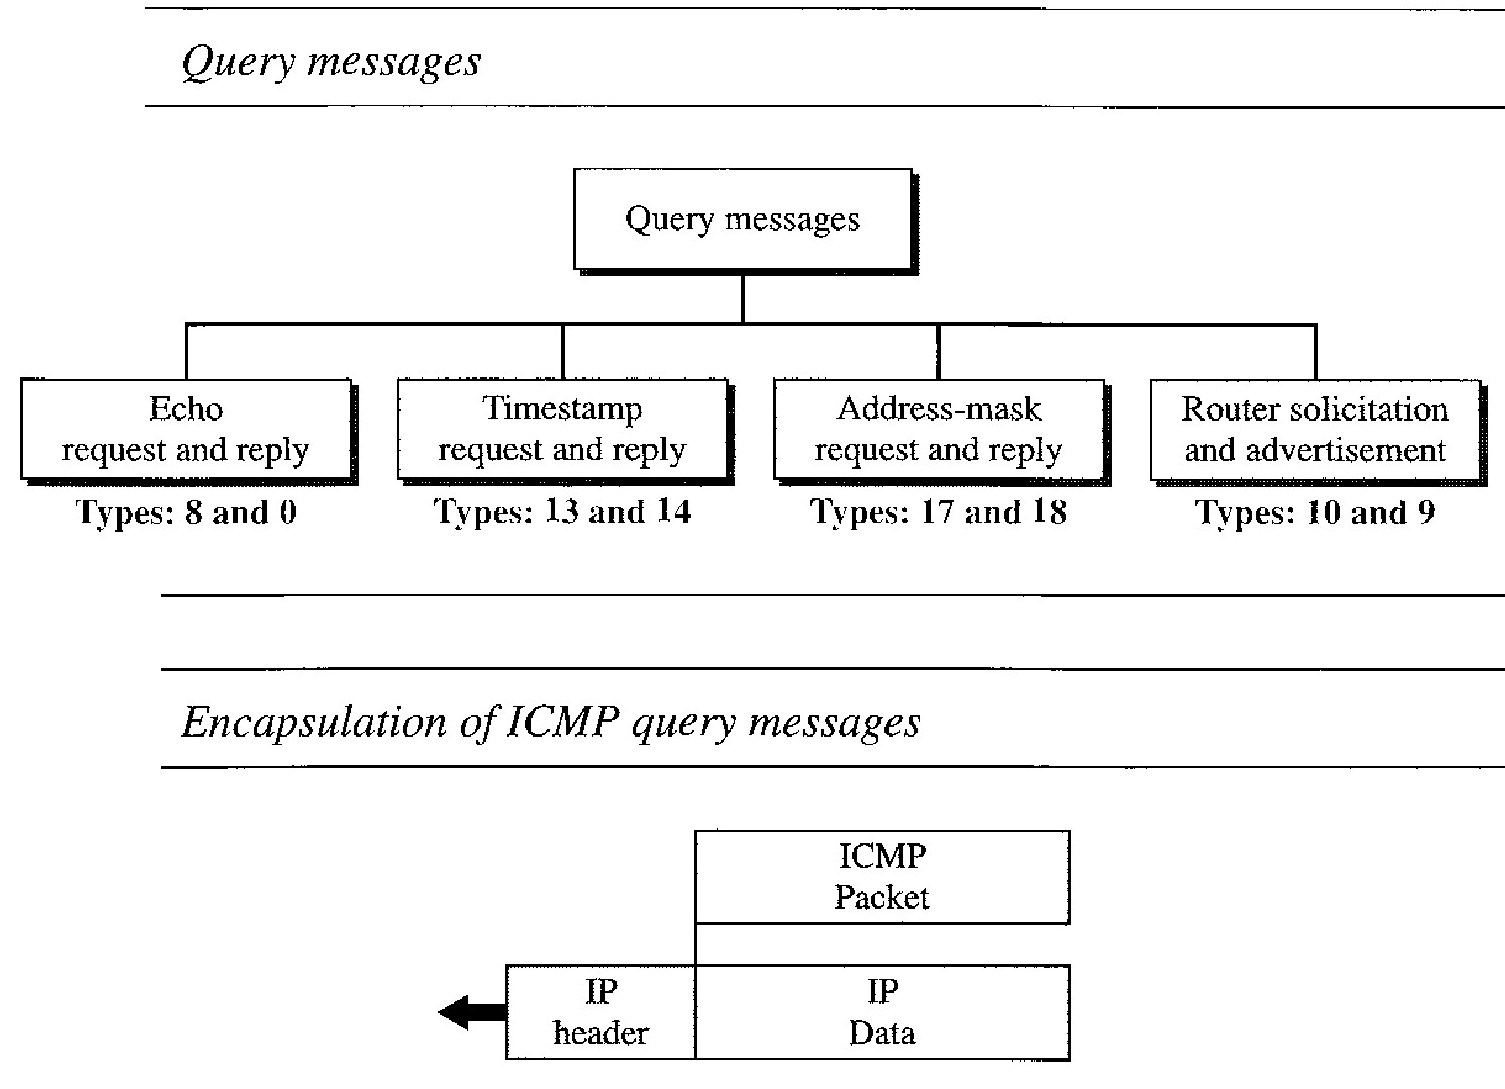 ICMP query messages